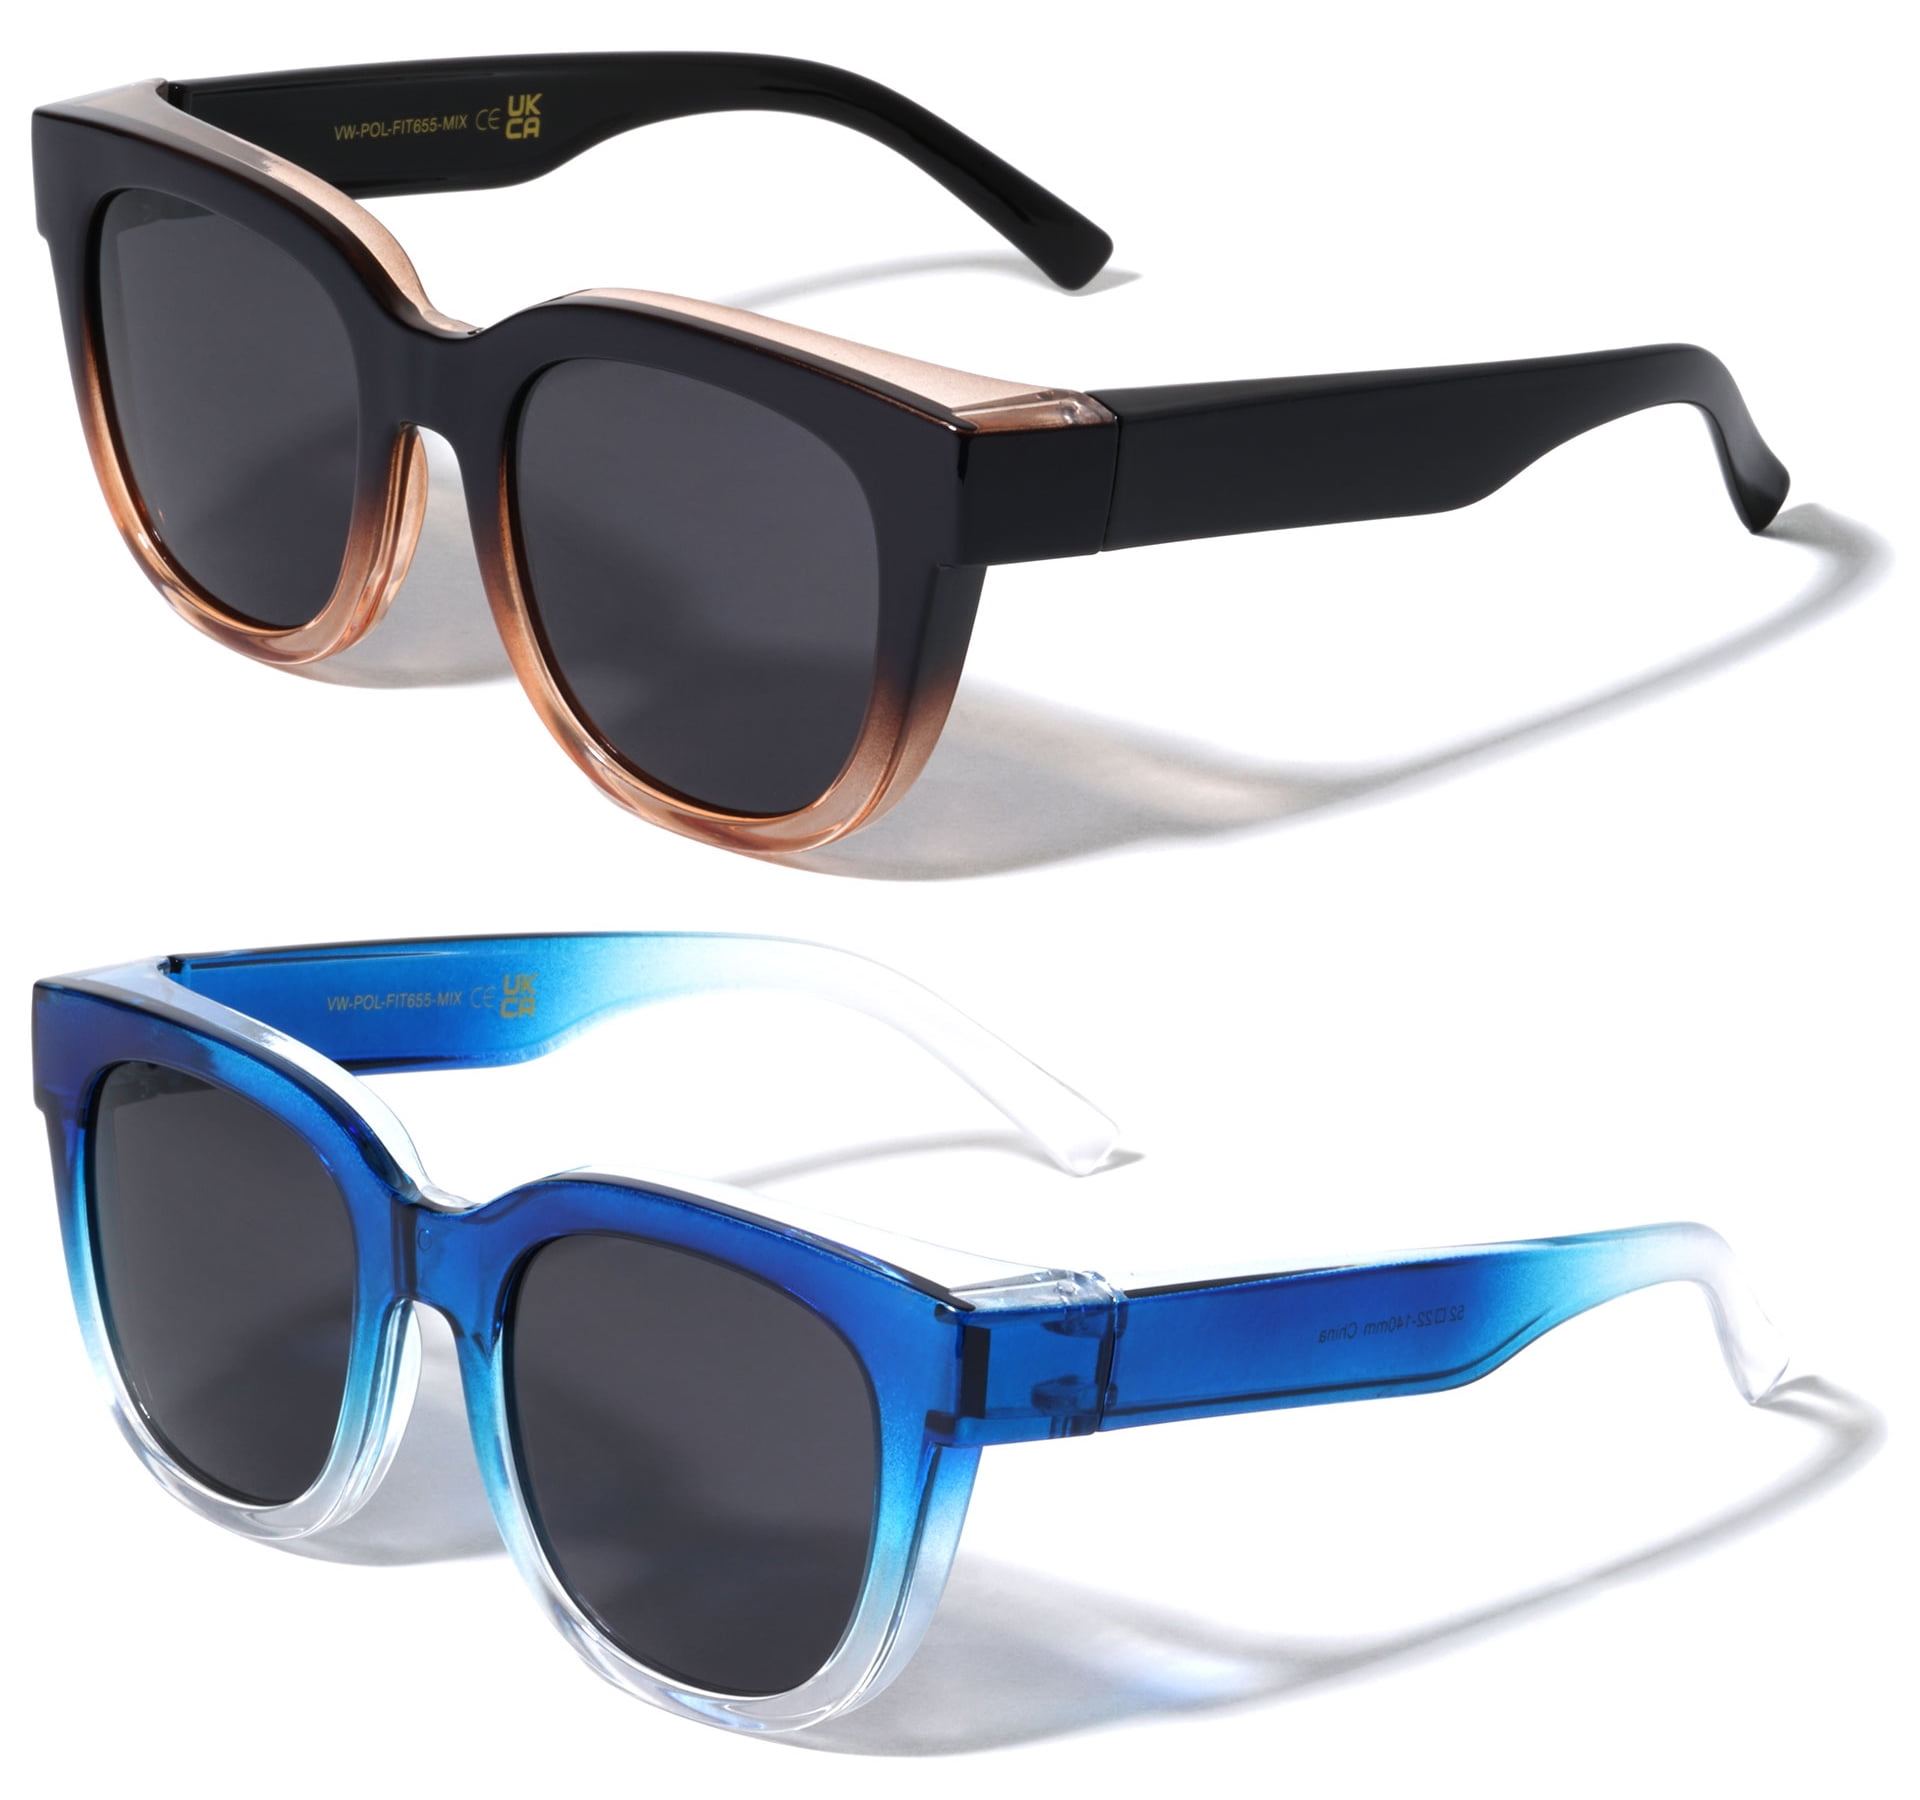 BattleVision Wrap Arounds HD Polarized Sunglasses As Seen On TV